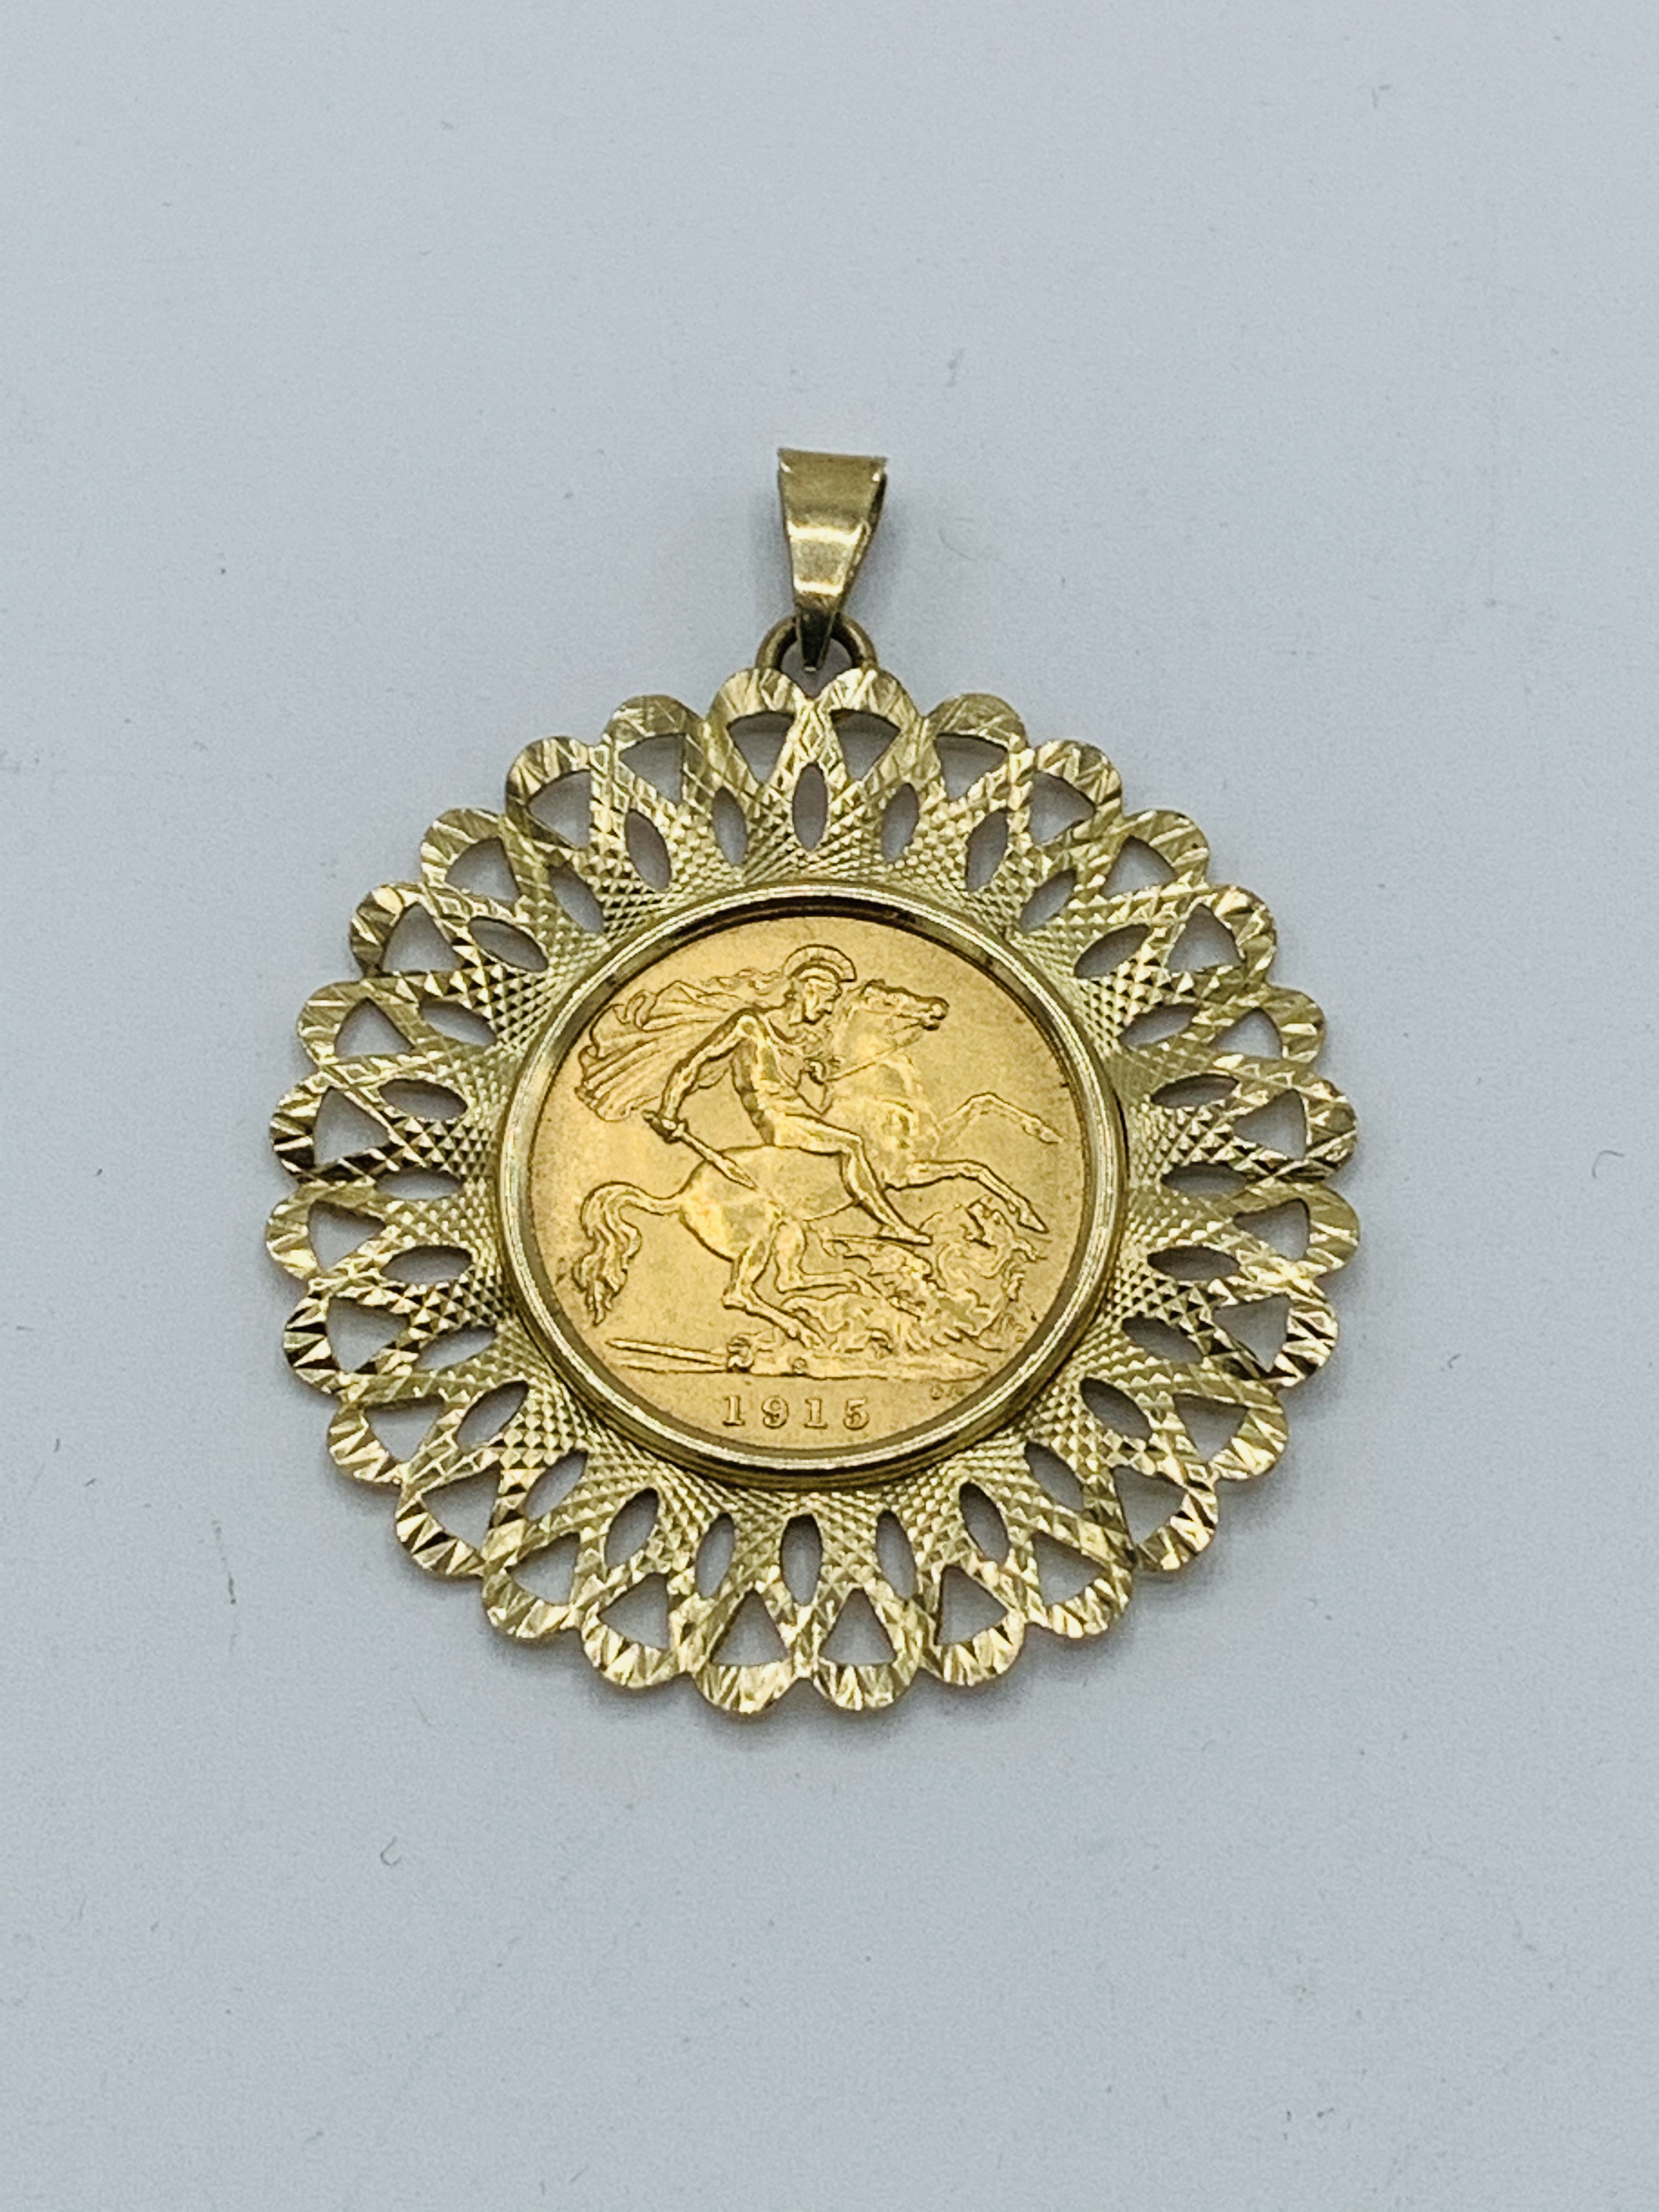 1915 gold half sovereign in 9ct gold pendant, 6.5gms